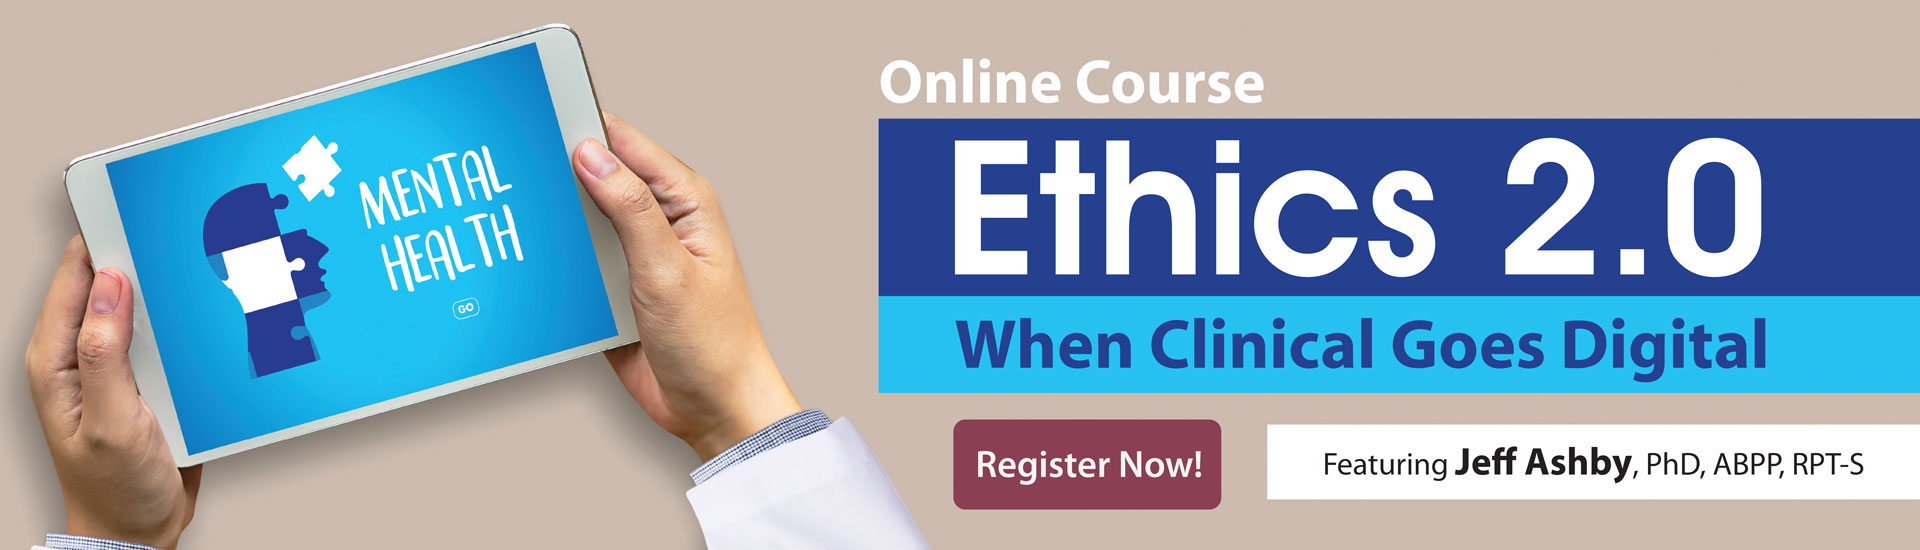 Ethics 2.0 When Clinical Goes Digital